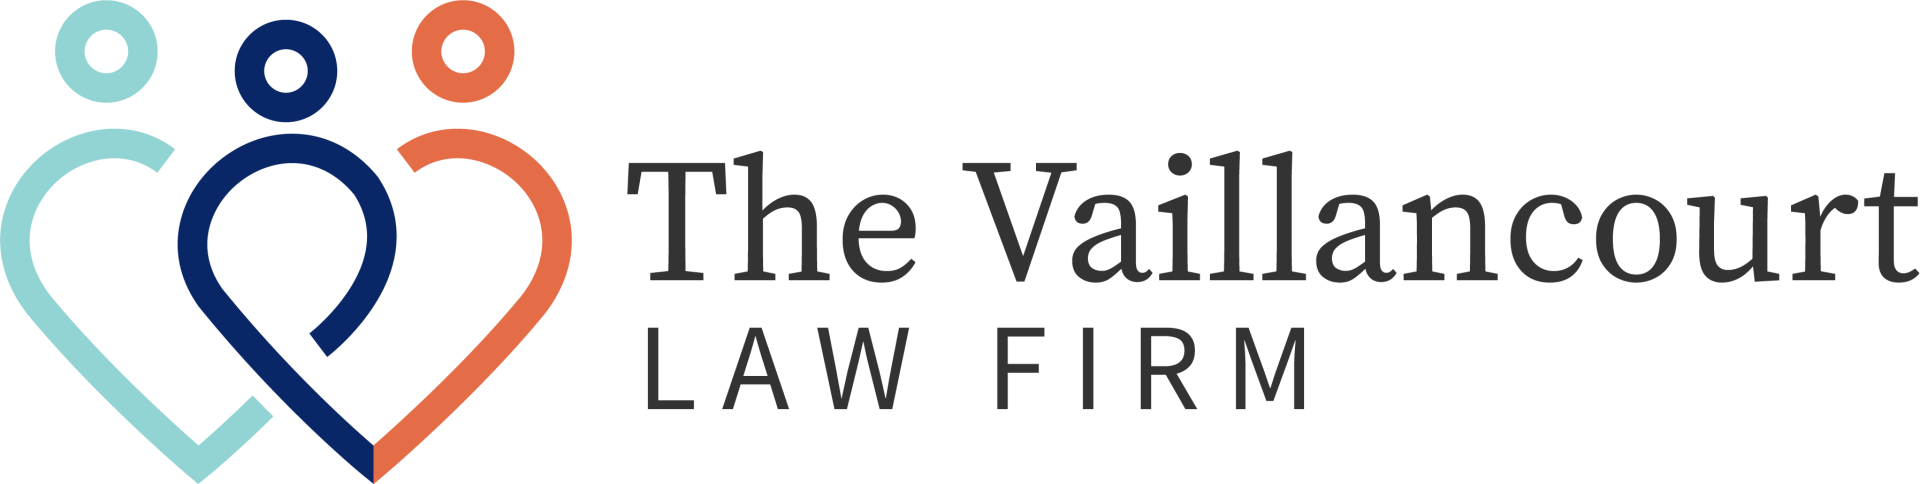 The Vaillancourt Law Firm Logo